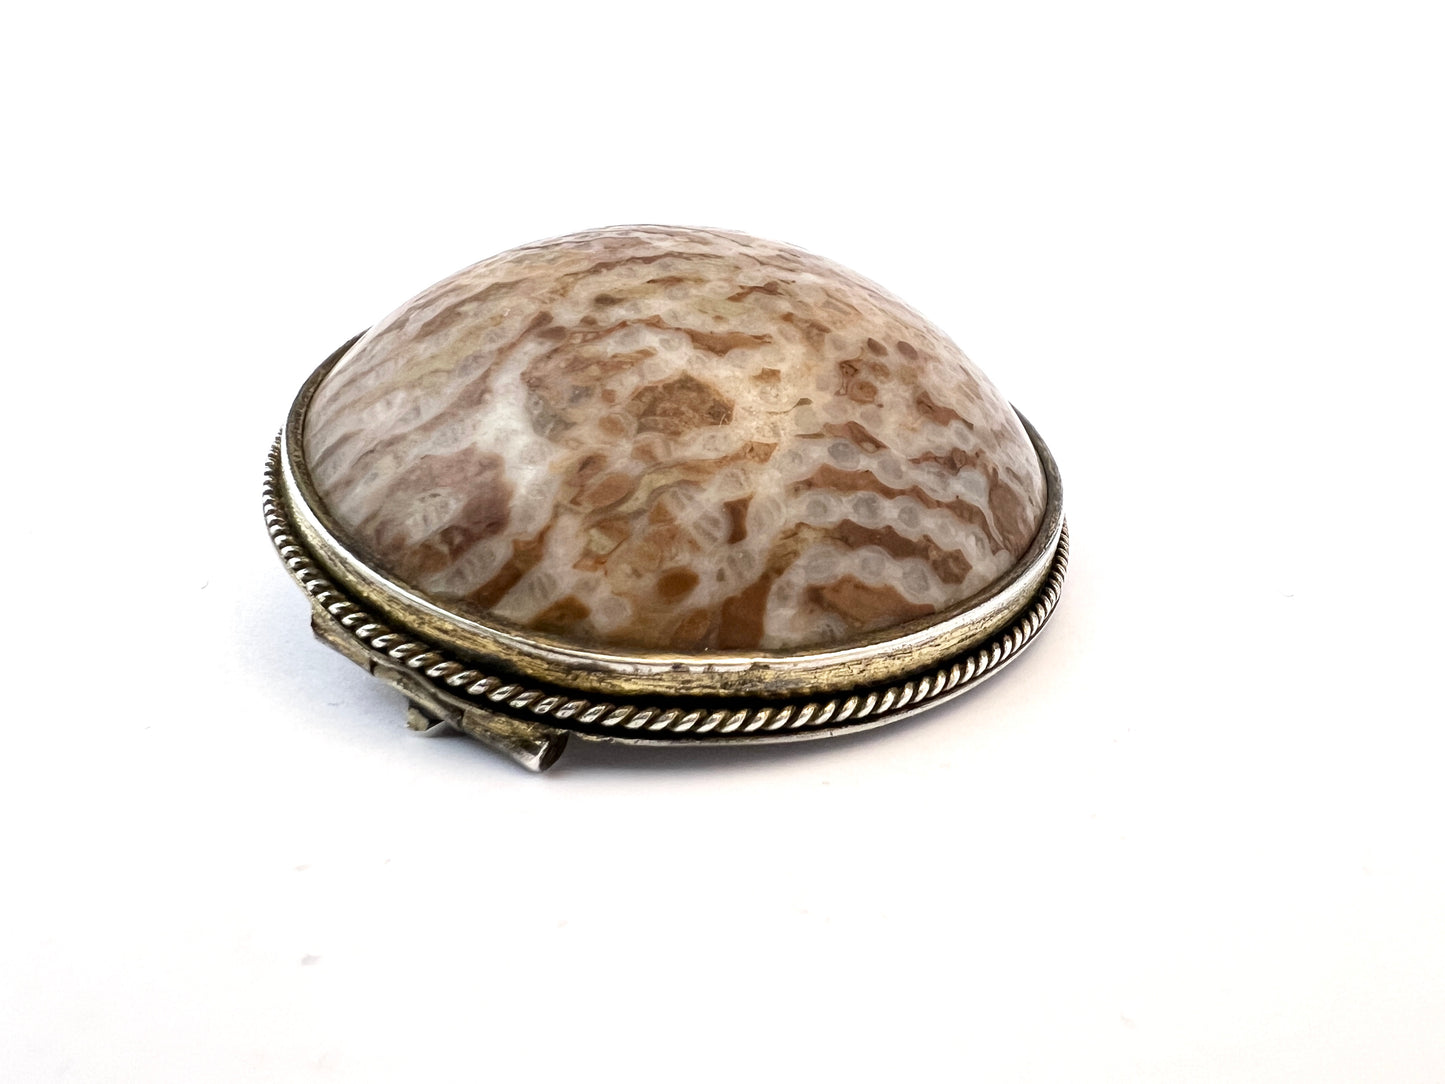 Sweden year 1869. Antique Victorian Large Silver Marble Brooch